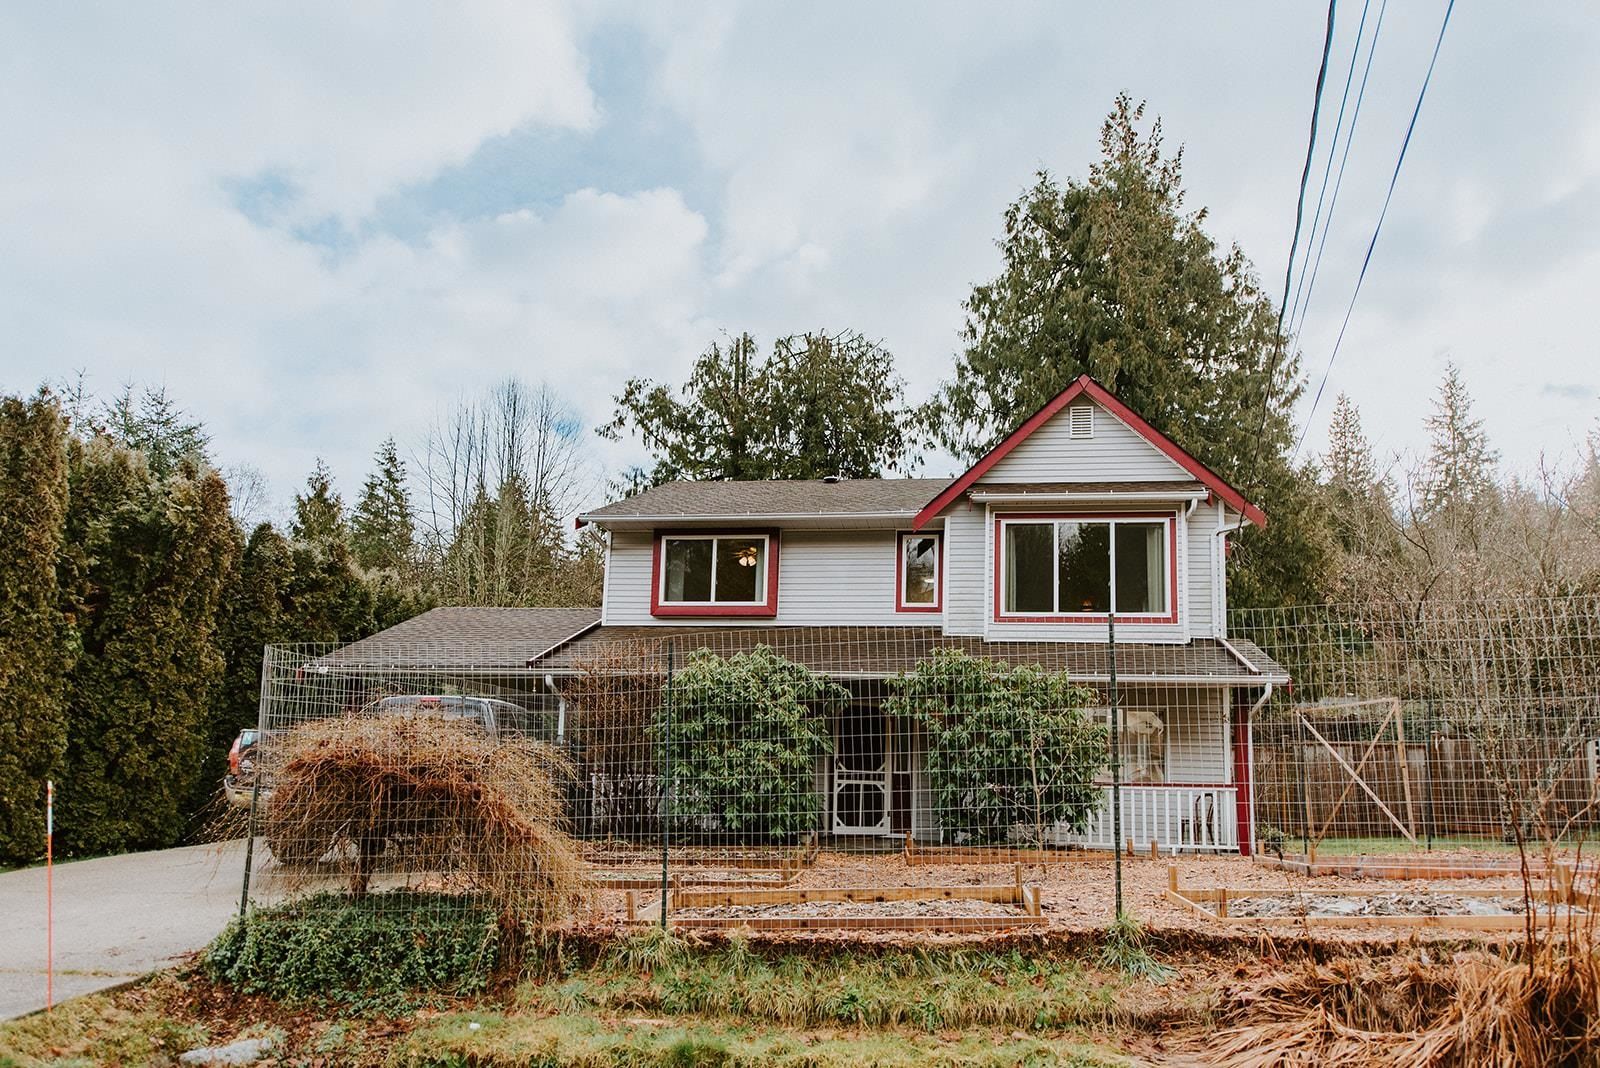 Open House. Open House on Saturday, March 18, 2023 1:00PM - 3:00PM
Come and tour this lovely, suited family home in Langdale just minutes to school, parks and ferries!